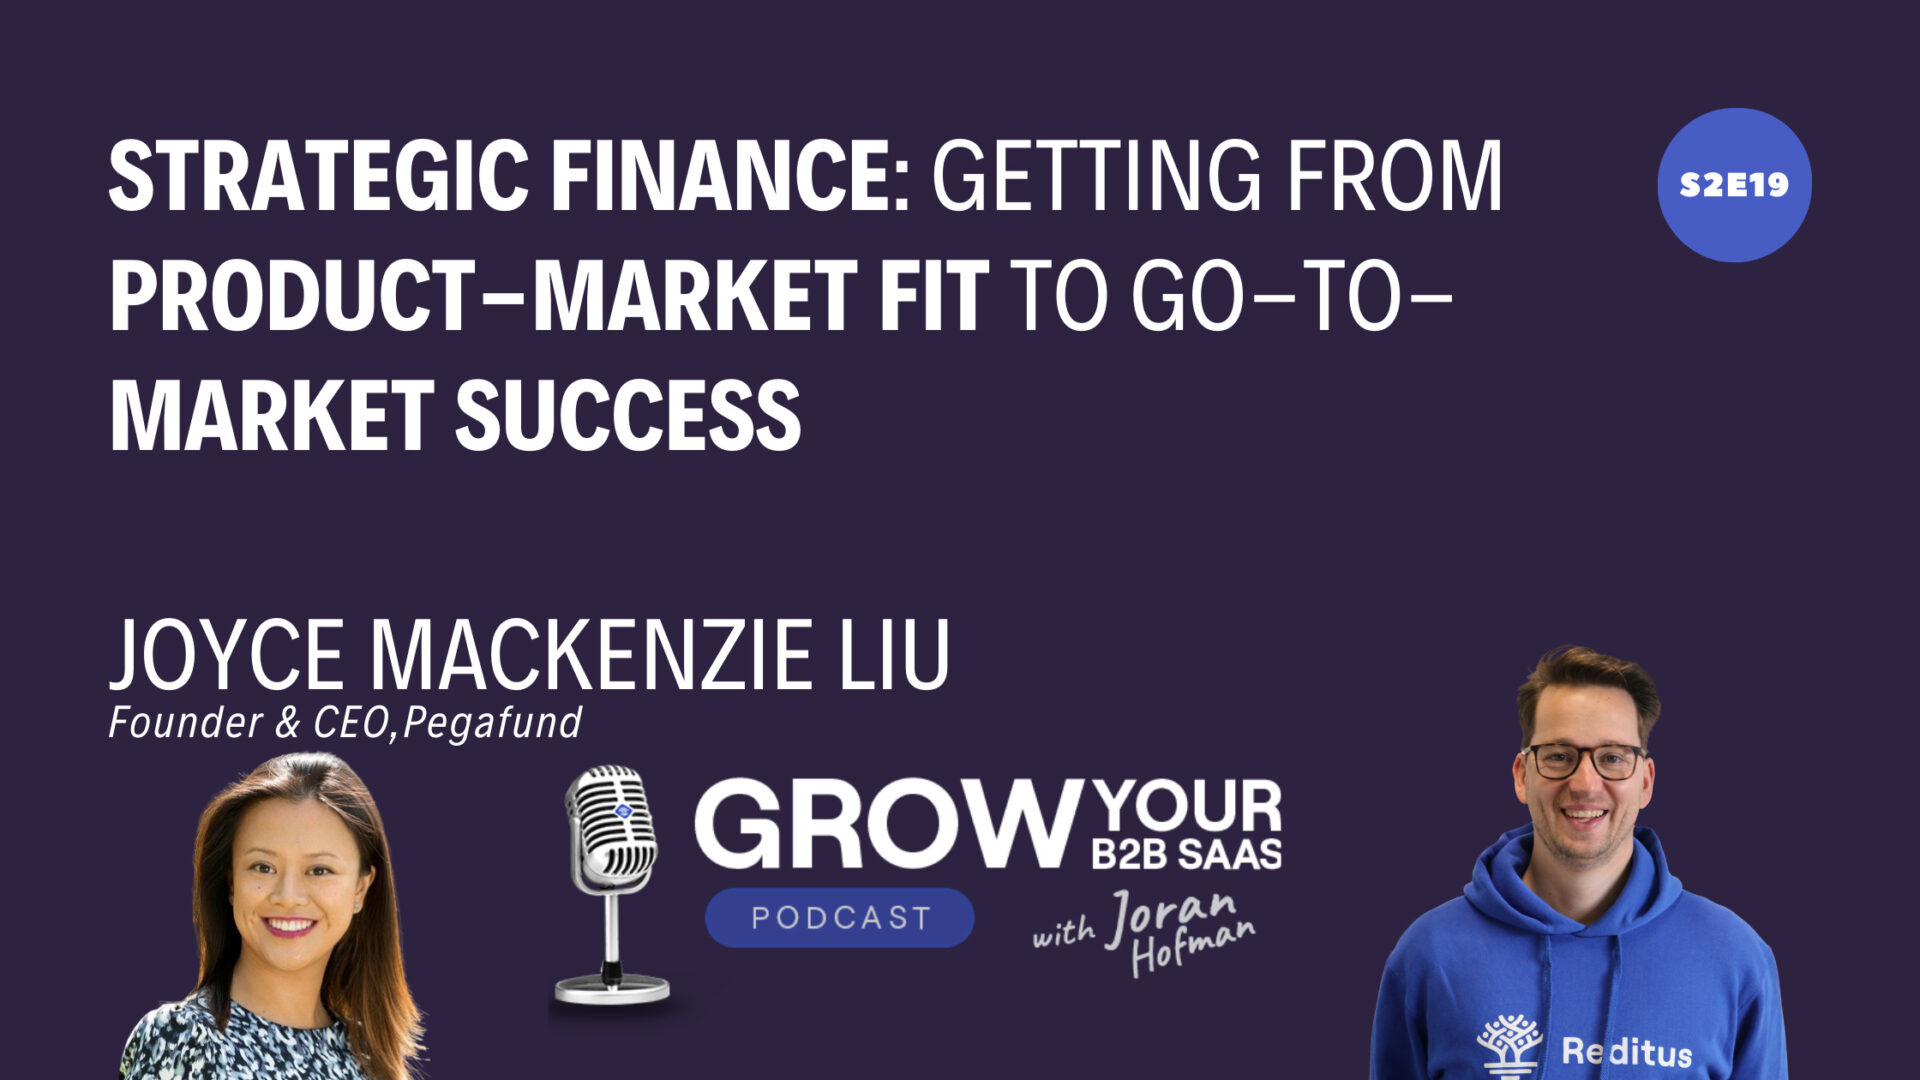 S2E19 – Strategic Finance: getting from Product-Market Fit to Go-To-Market Success